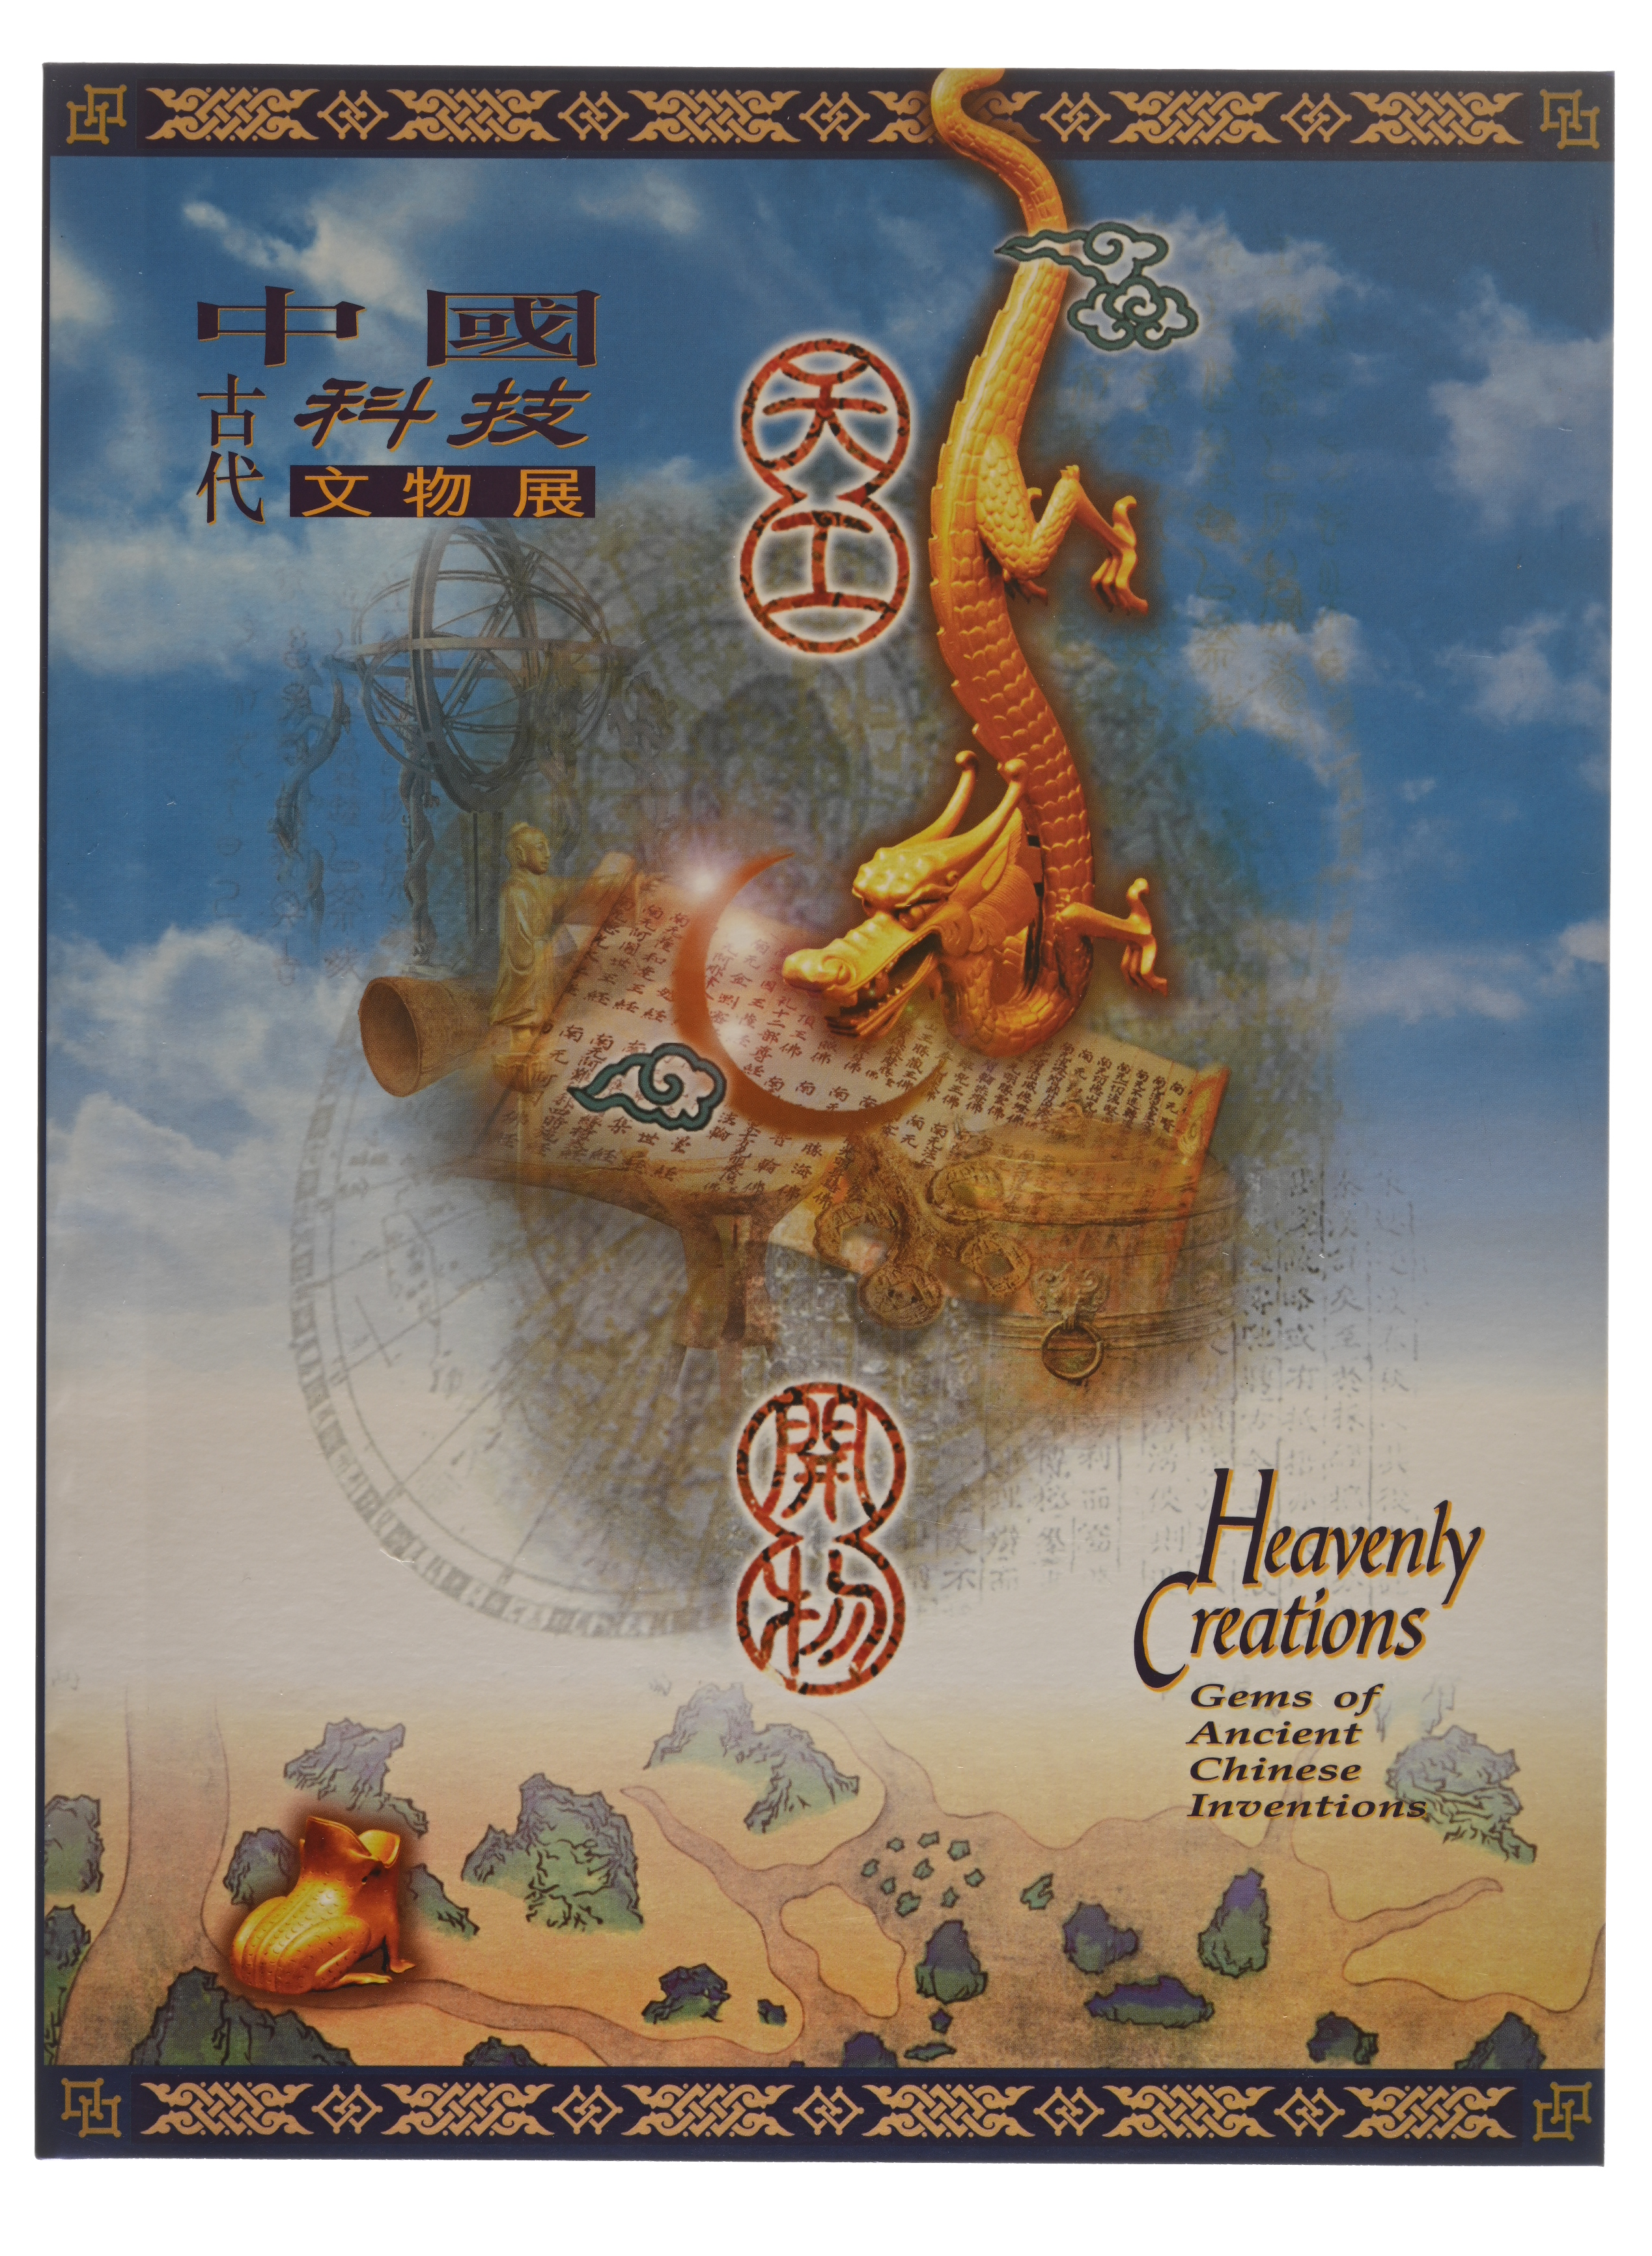 Heavenly Creations - Gems of Ancient Chinese InventionsA History of the Municipal Councils of Hong Kong : 1883 - 1999